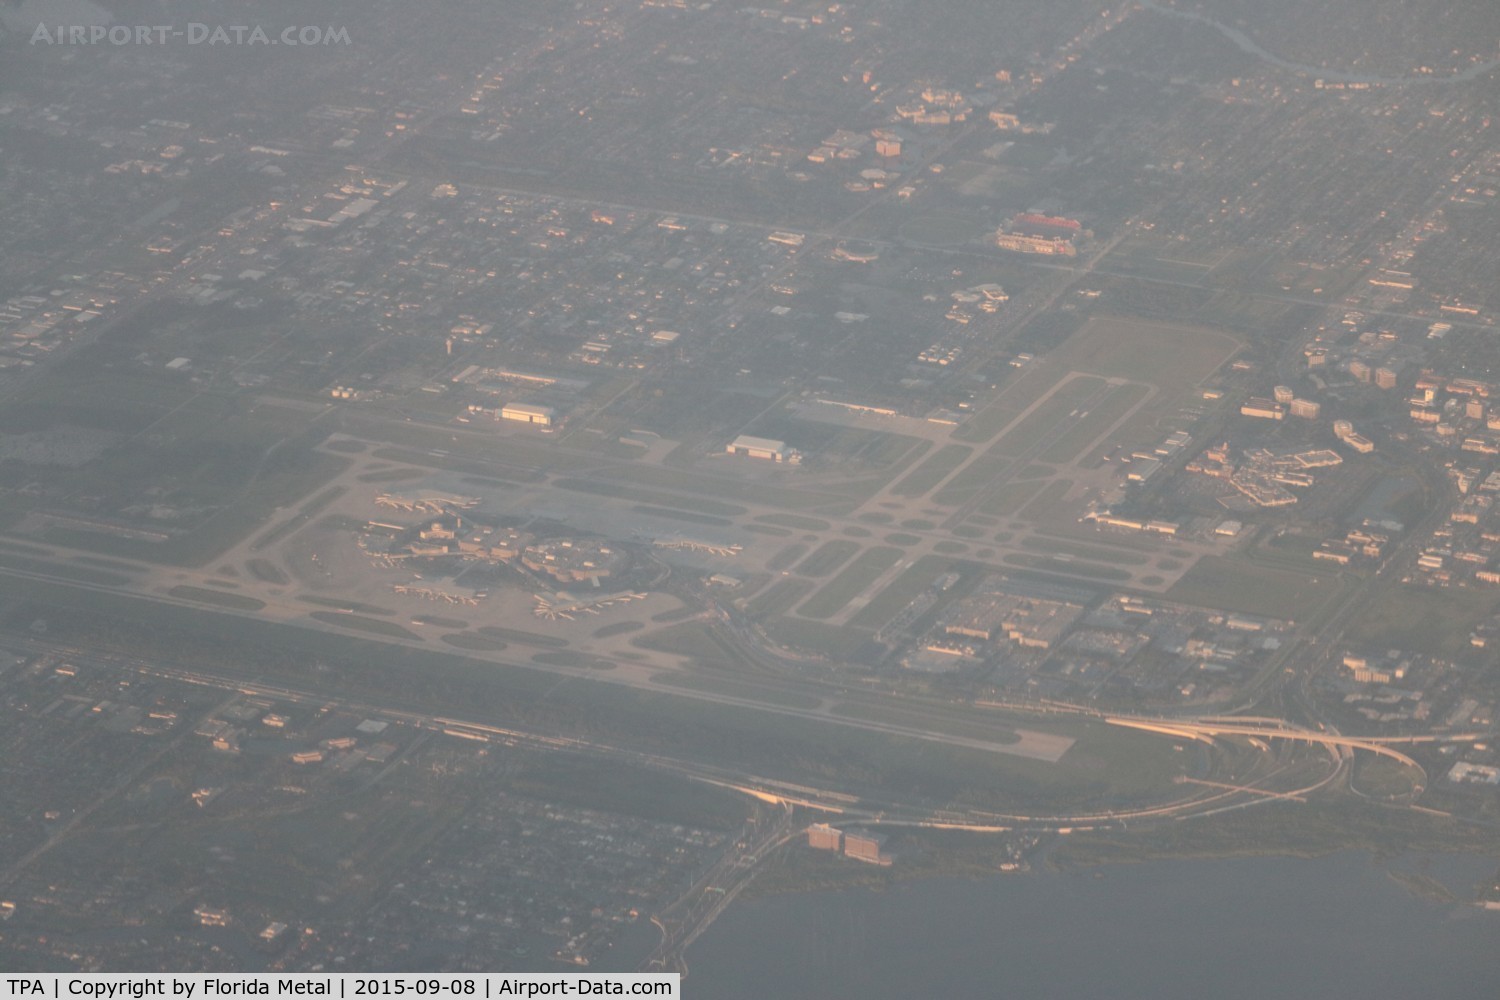 Tampa International Airport (TPA) - Tampa Airport from the air